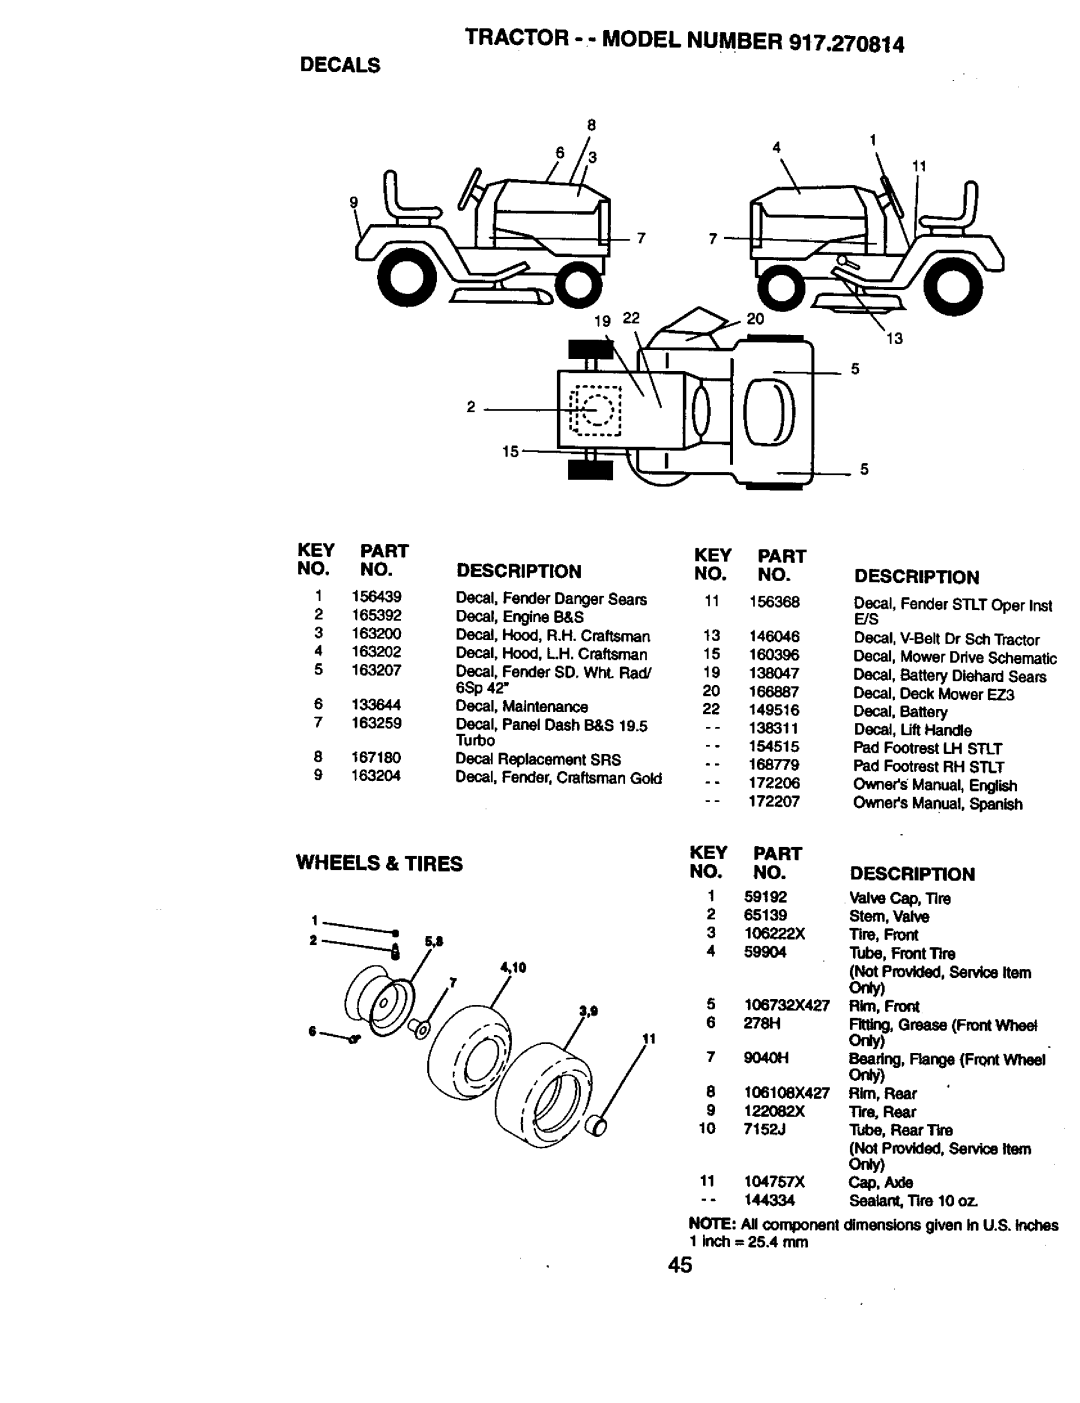 Craftsman 917.270814 owner manual Decals, Tractor --Model Number, Only 